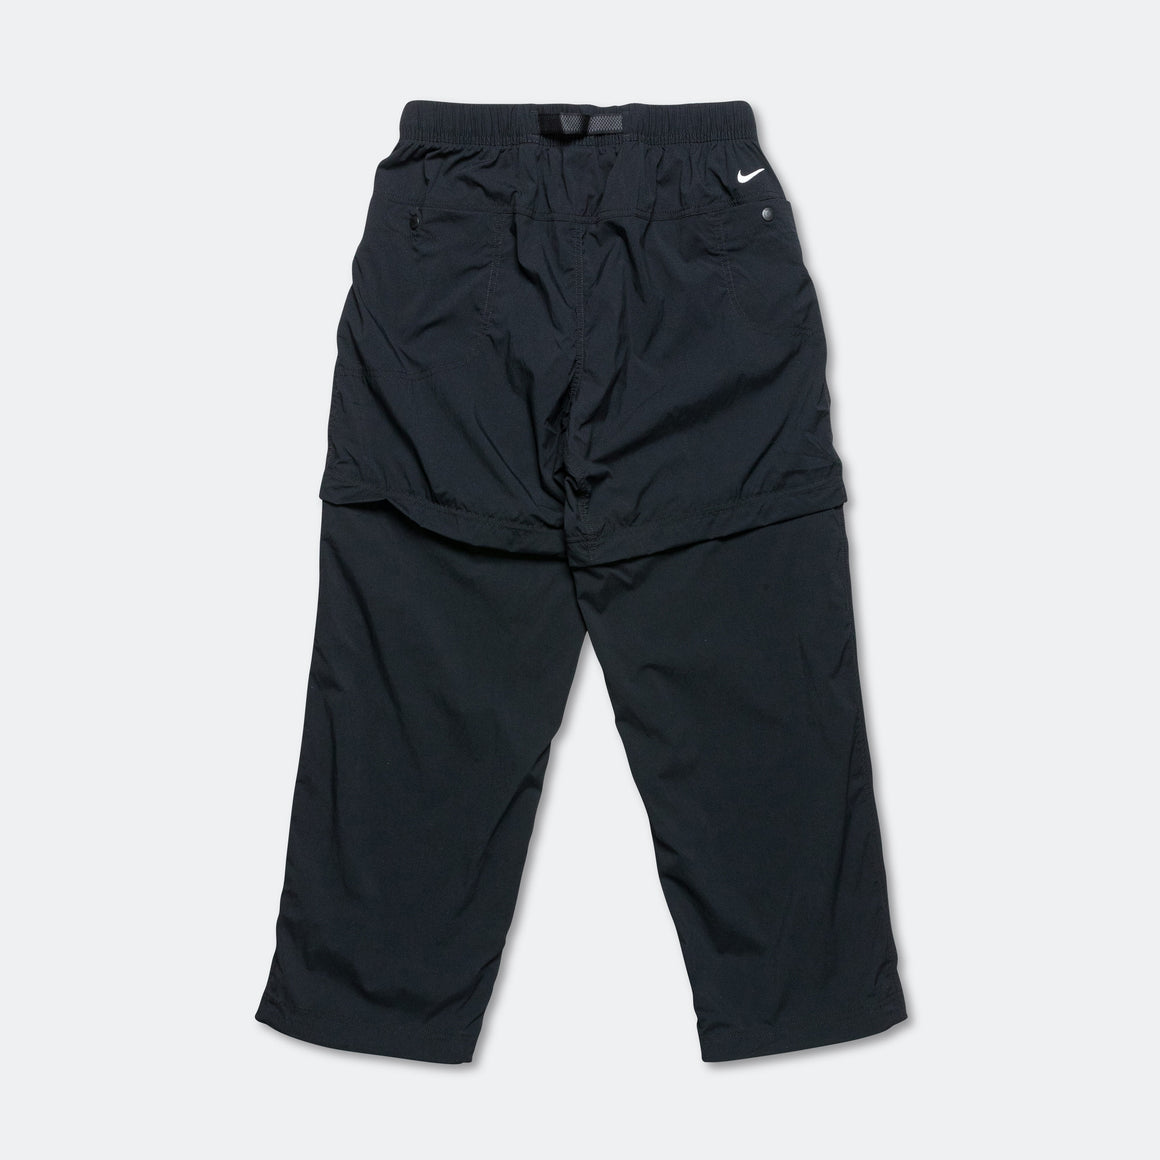 Trail Zip-Off Pant - Black/Anthracite-Summit White